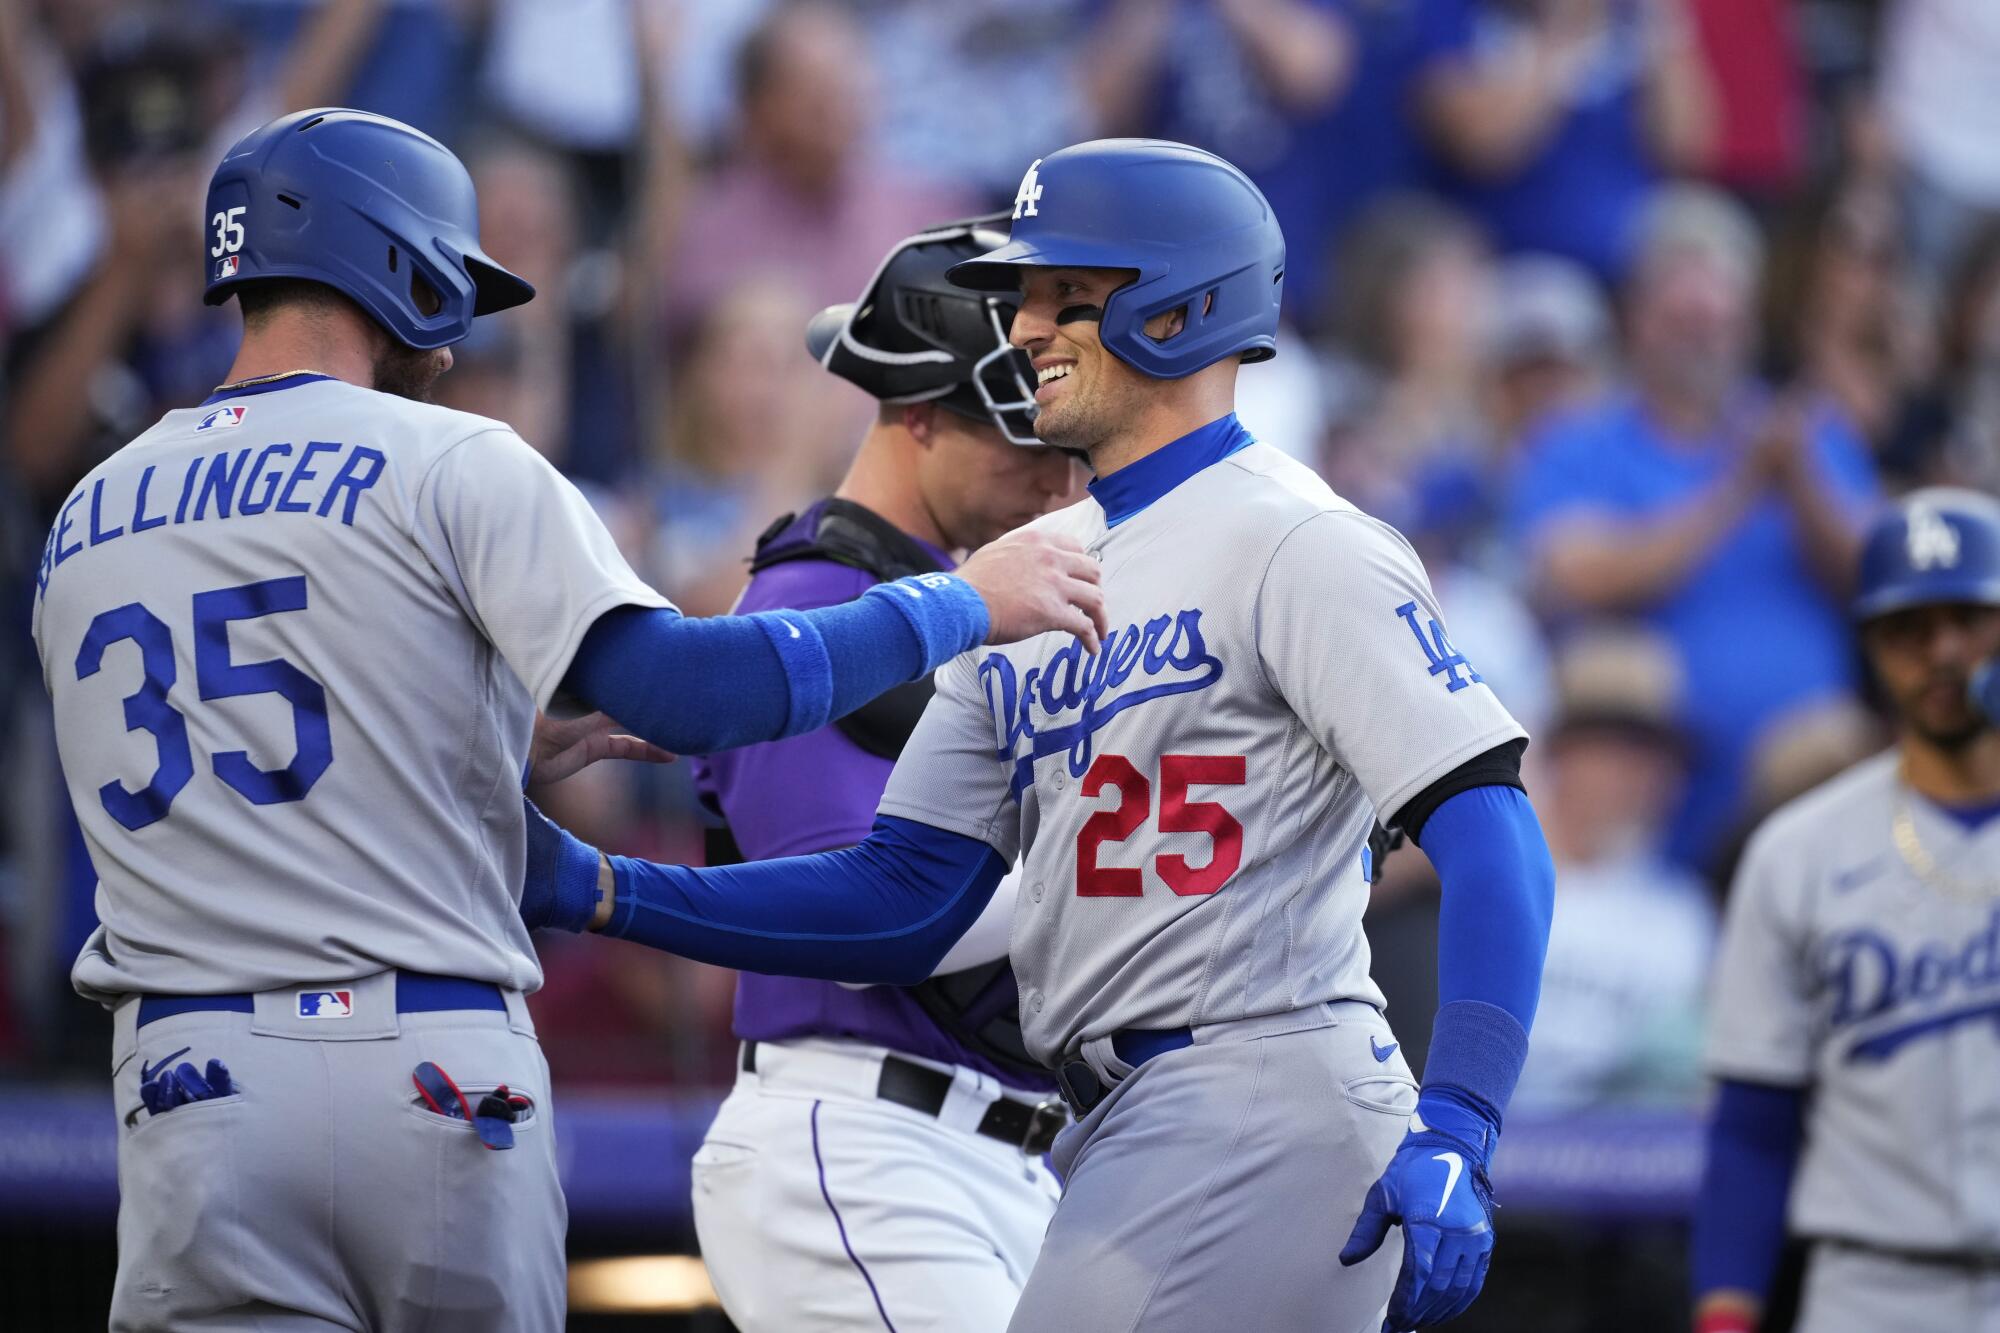 Trayce Thompson, right, is congratulated by Cody Bellinger after hitting a two-run home run against the Colorado Rockies.